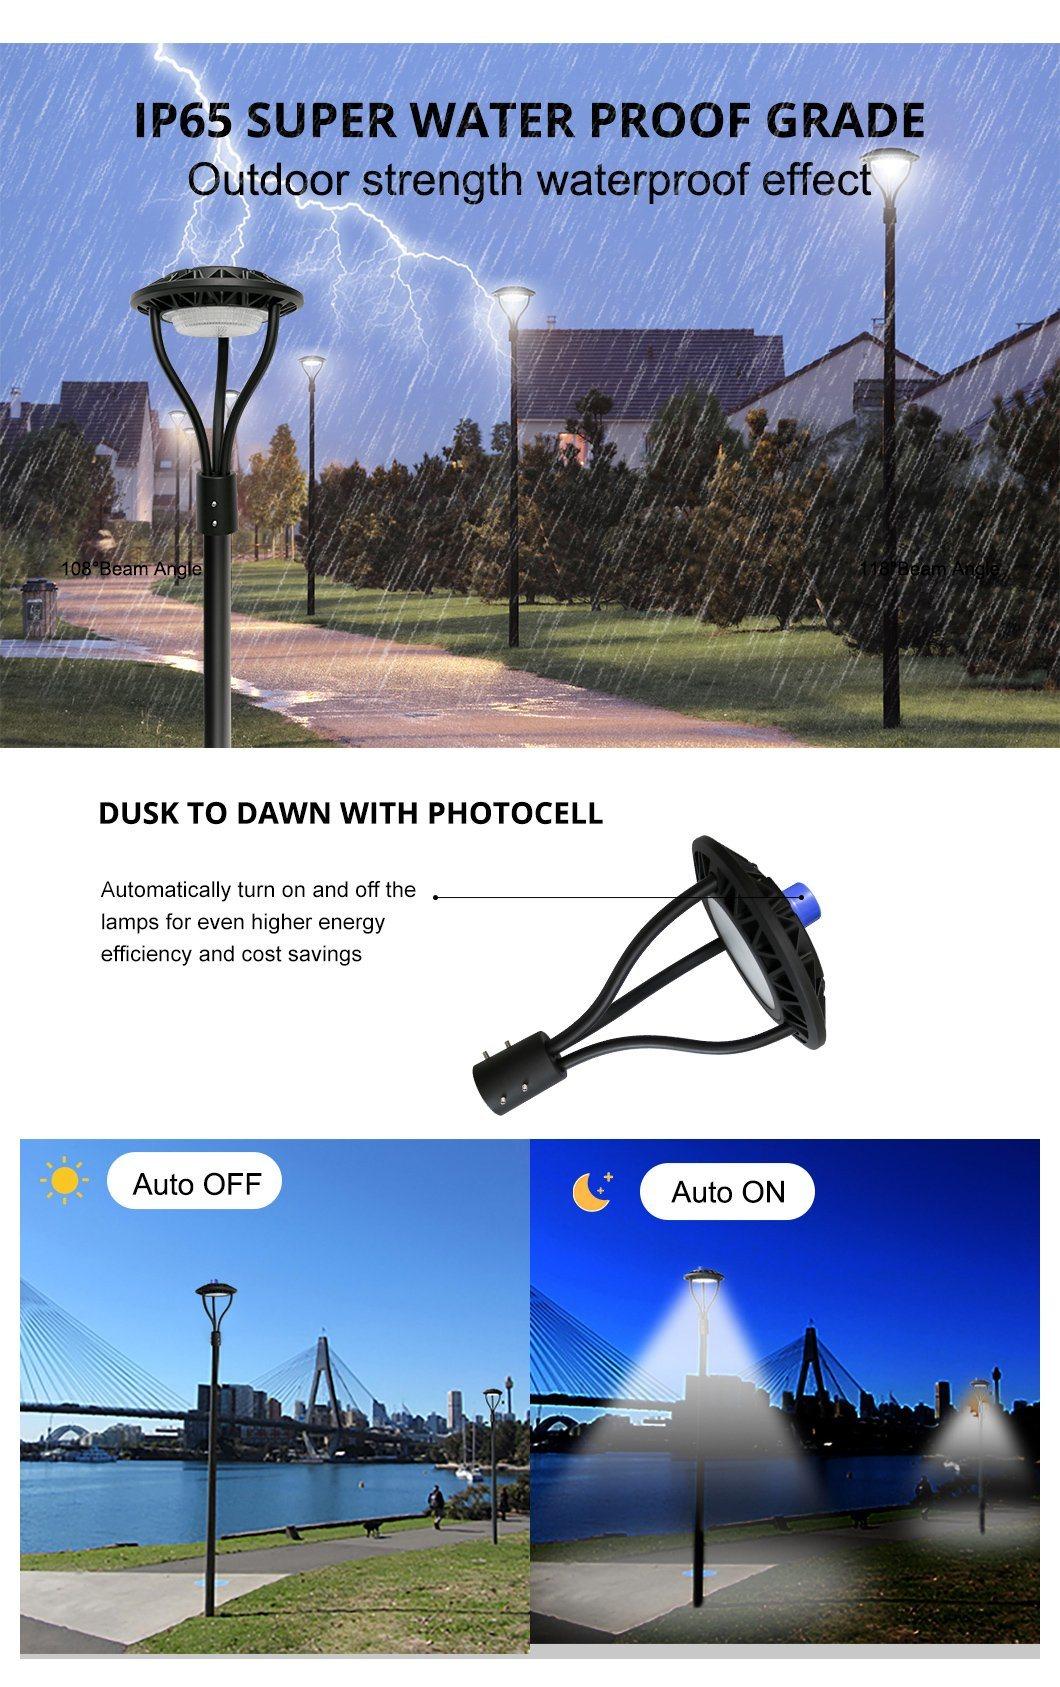 Good Performance IP65 Waterproof LED Post Garden Lights 100-277VAC 60W High Quality LED Post Top Area Light Fixtures